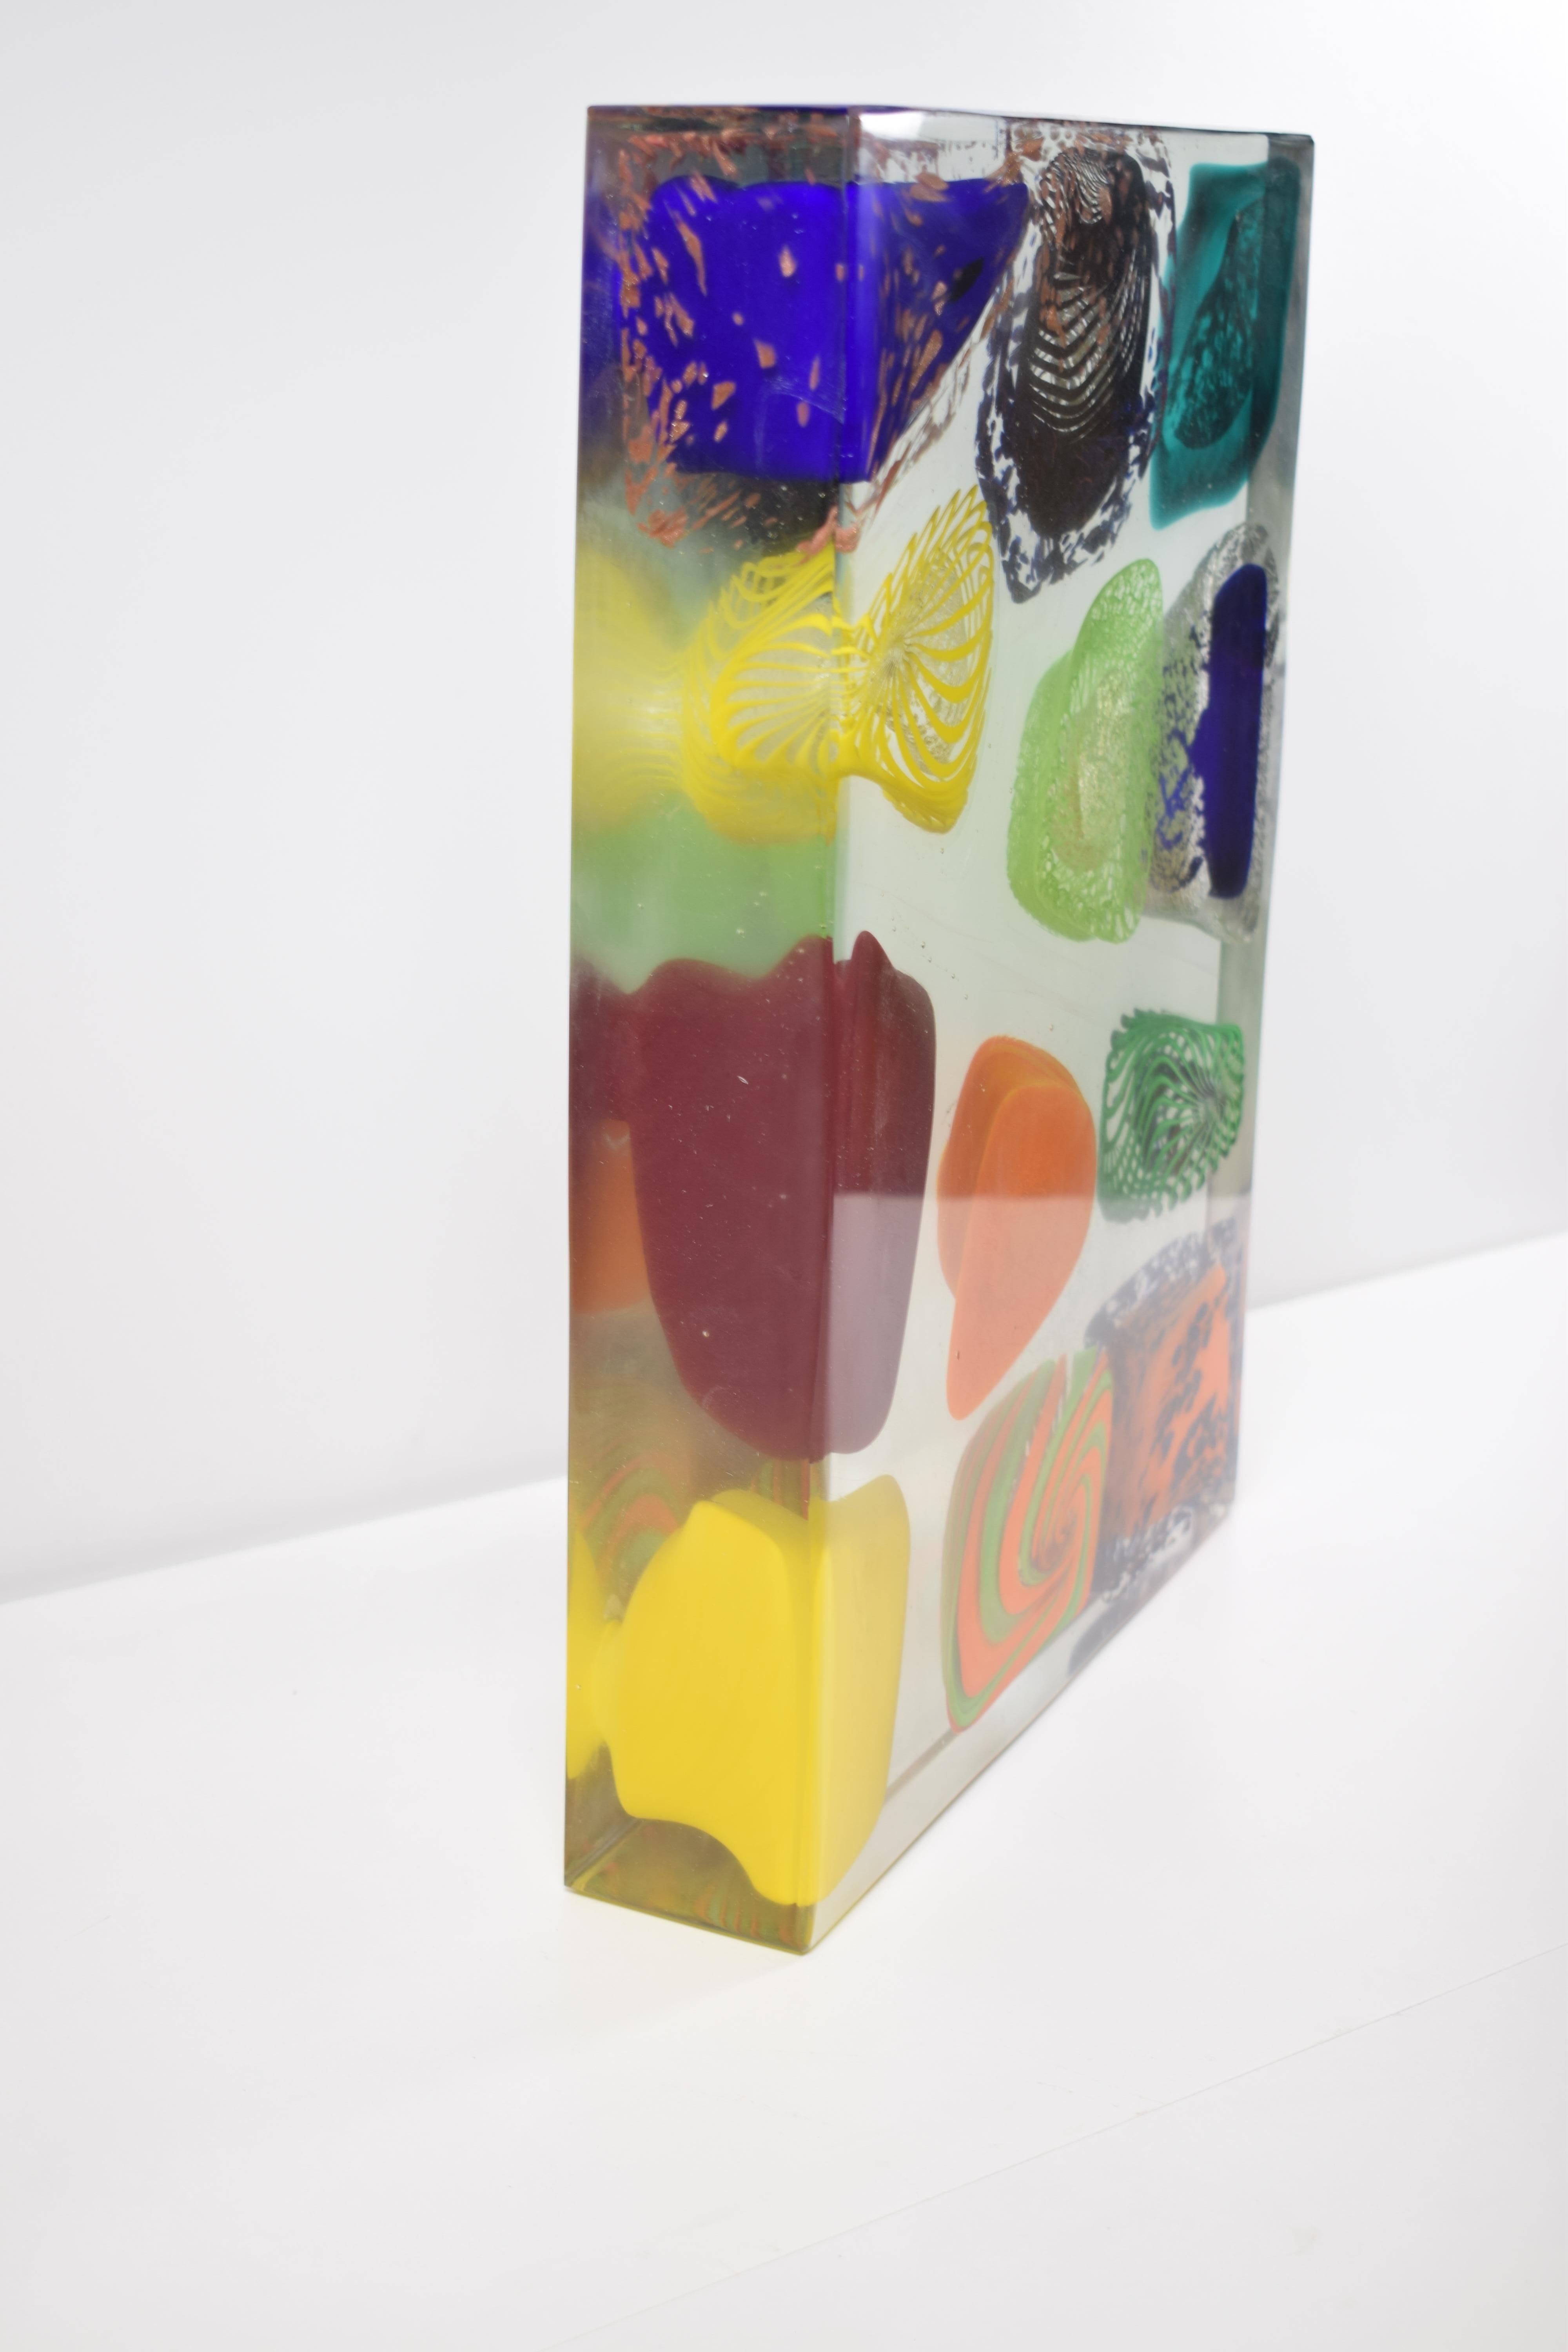 Italian Abstracts Sculptures Monolith Murano Glass For Sale